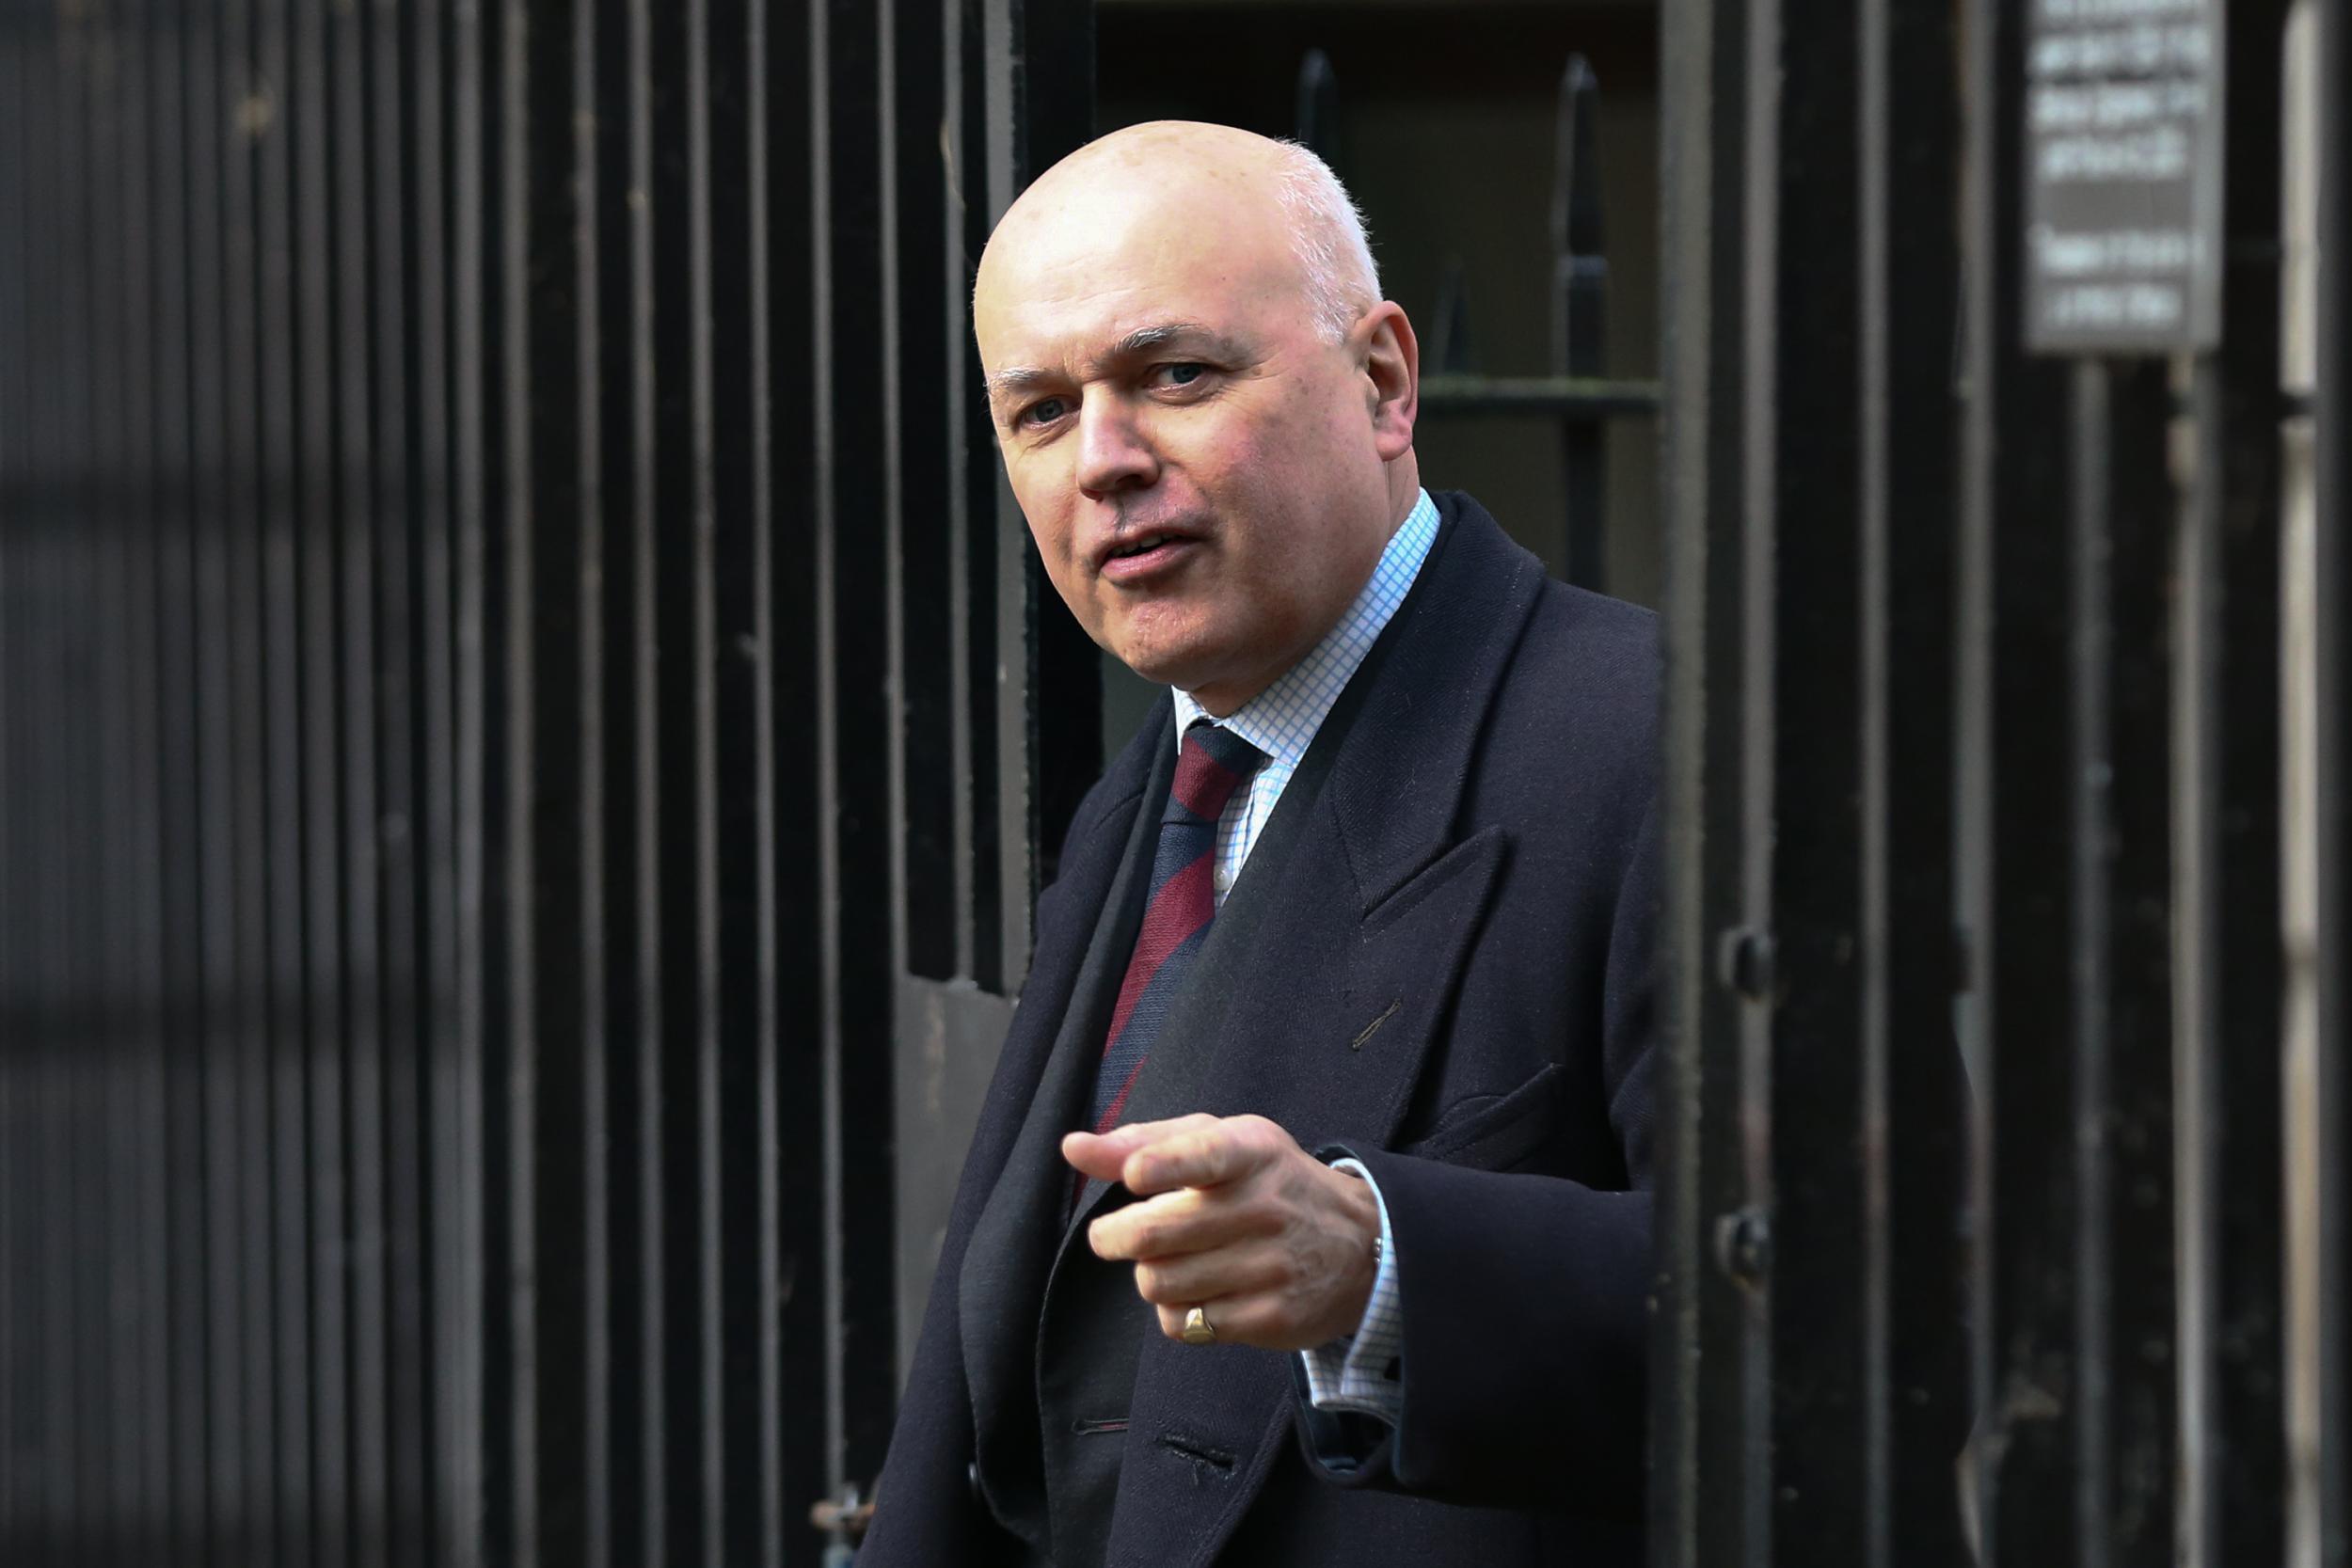 Department for Work and Pensions Minister Iain Duncan Smith